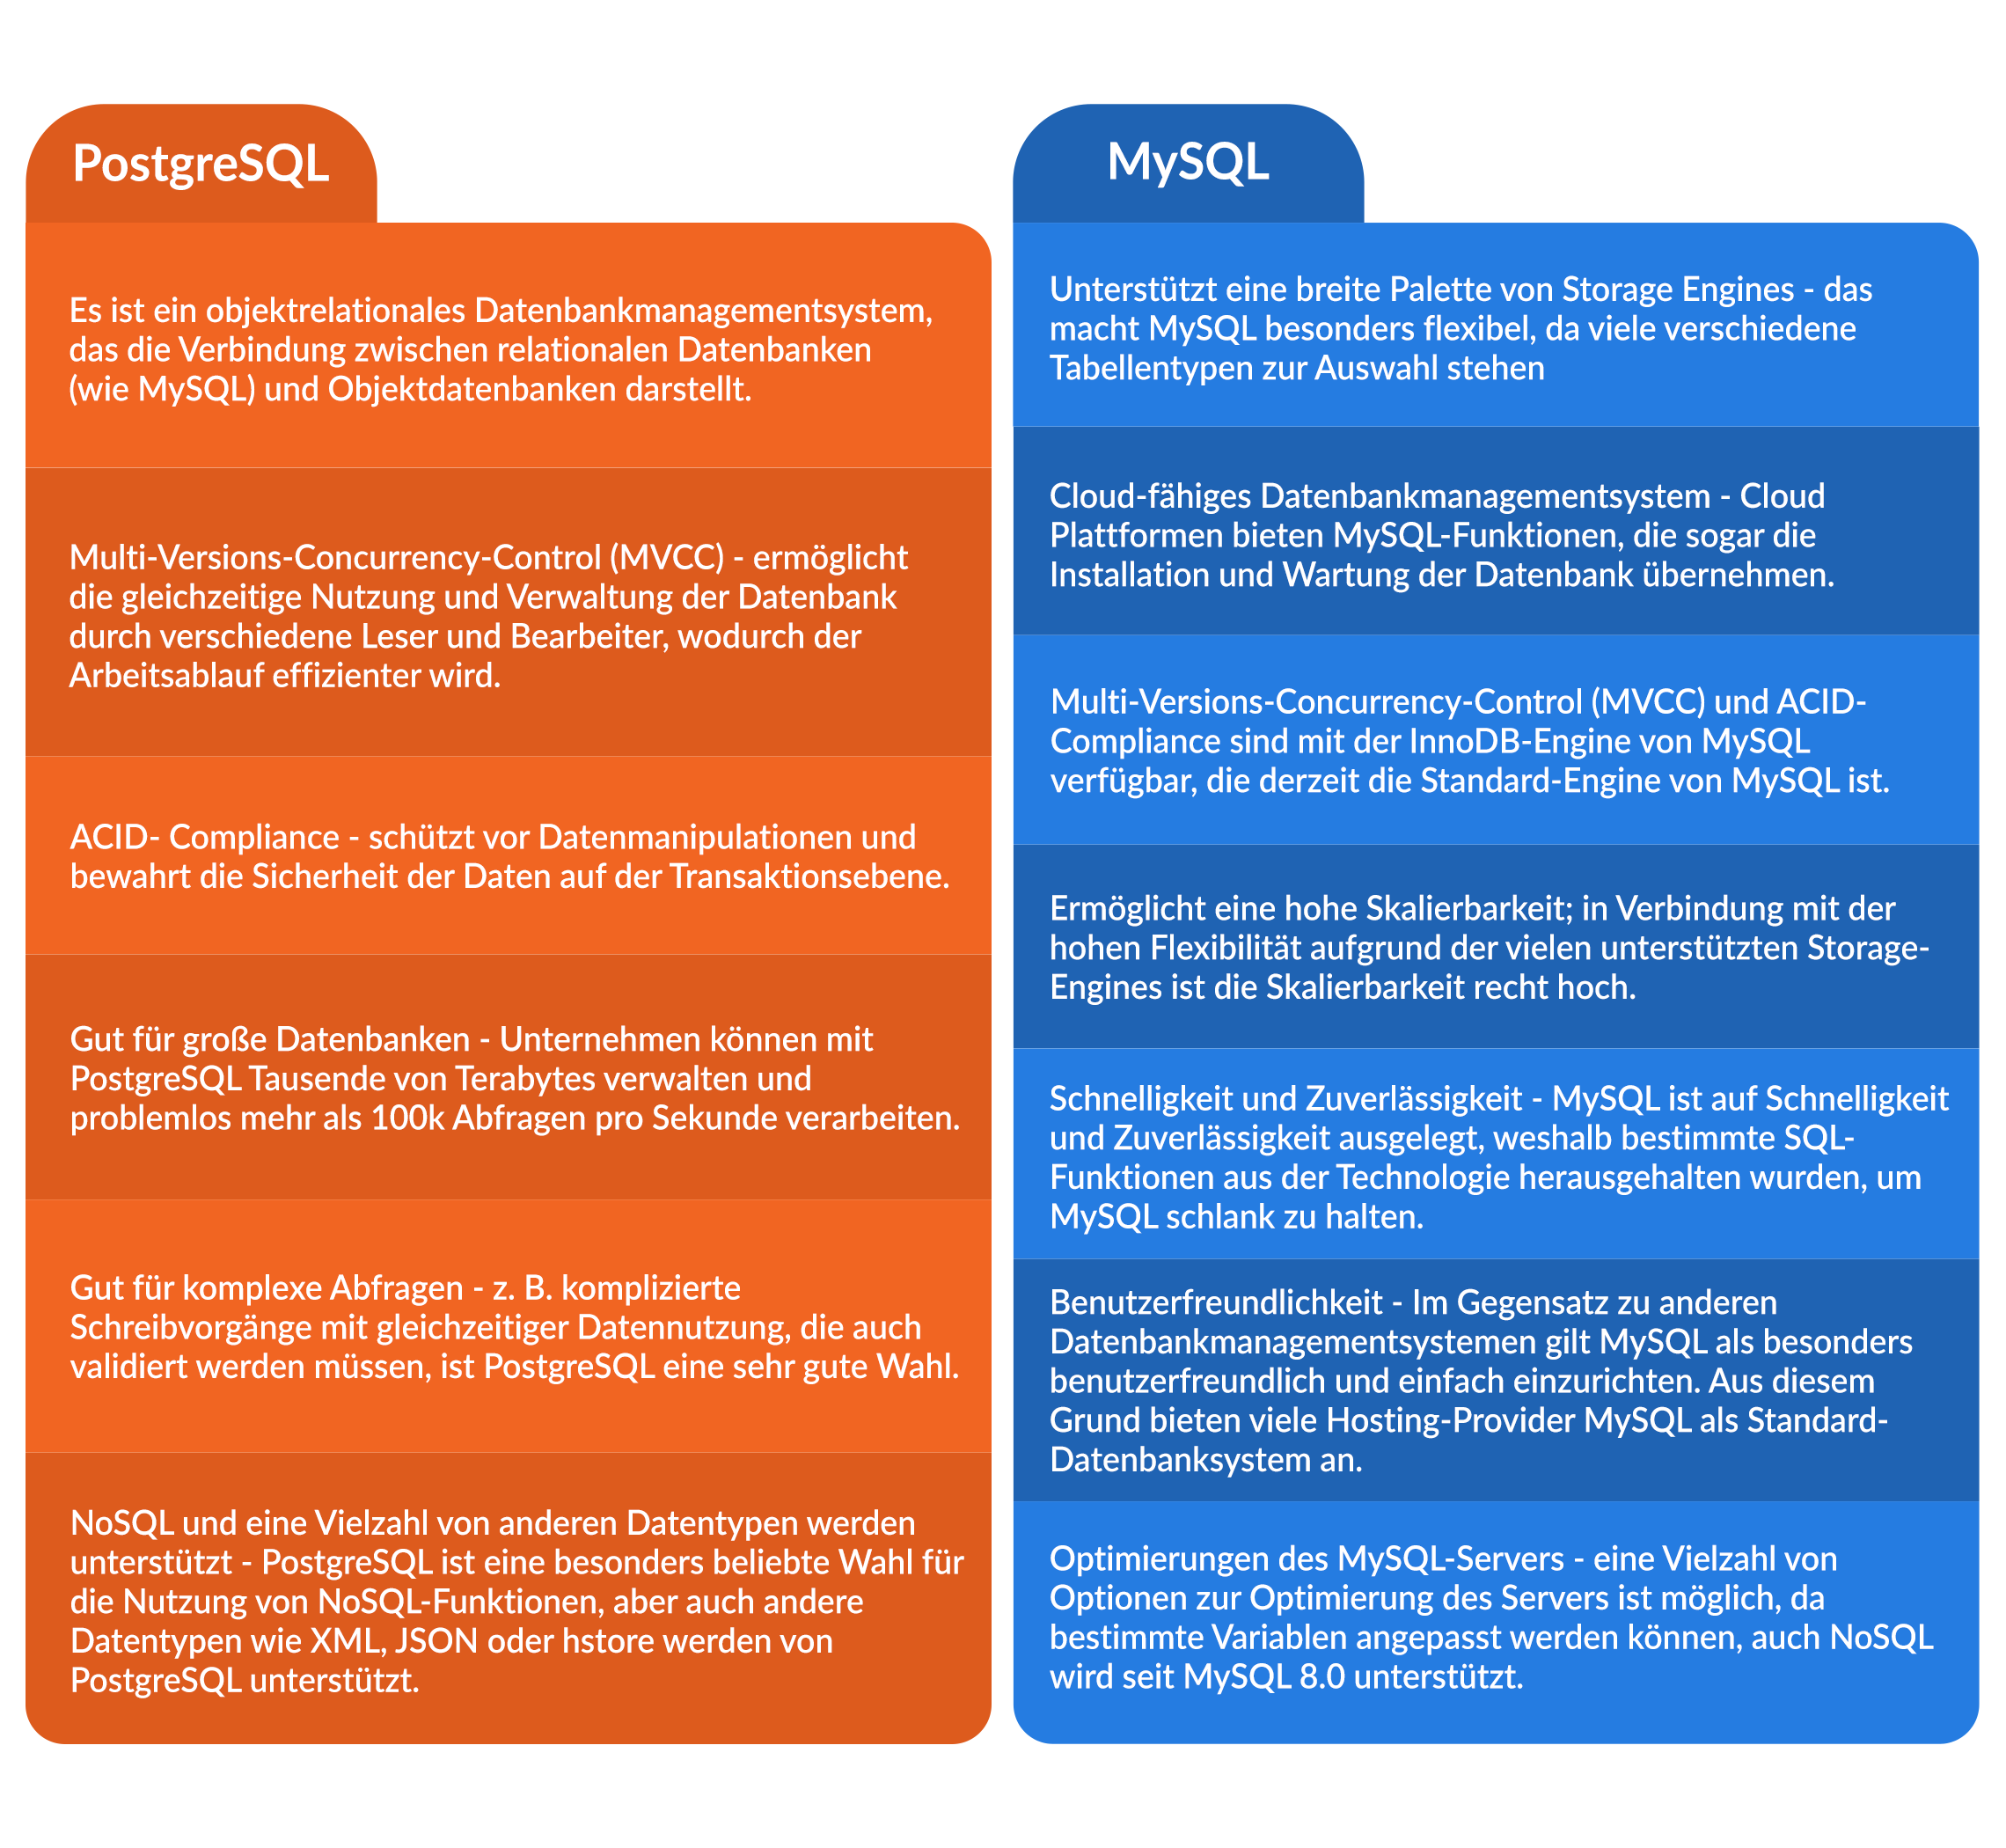 table comparing and contrasting features and functions of PostgreSQL vs MySQL German language DE